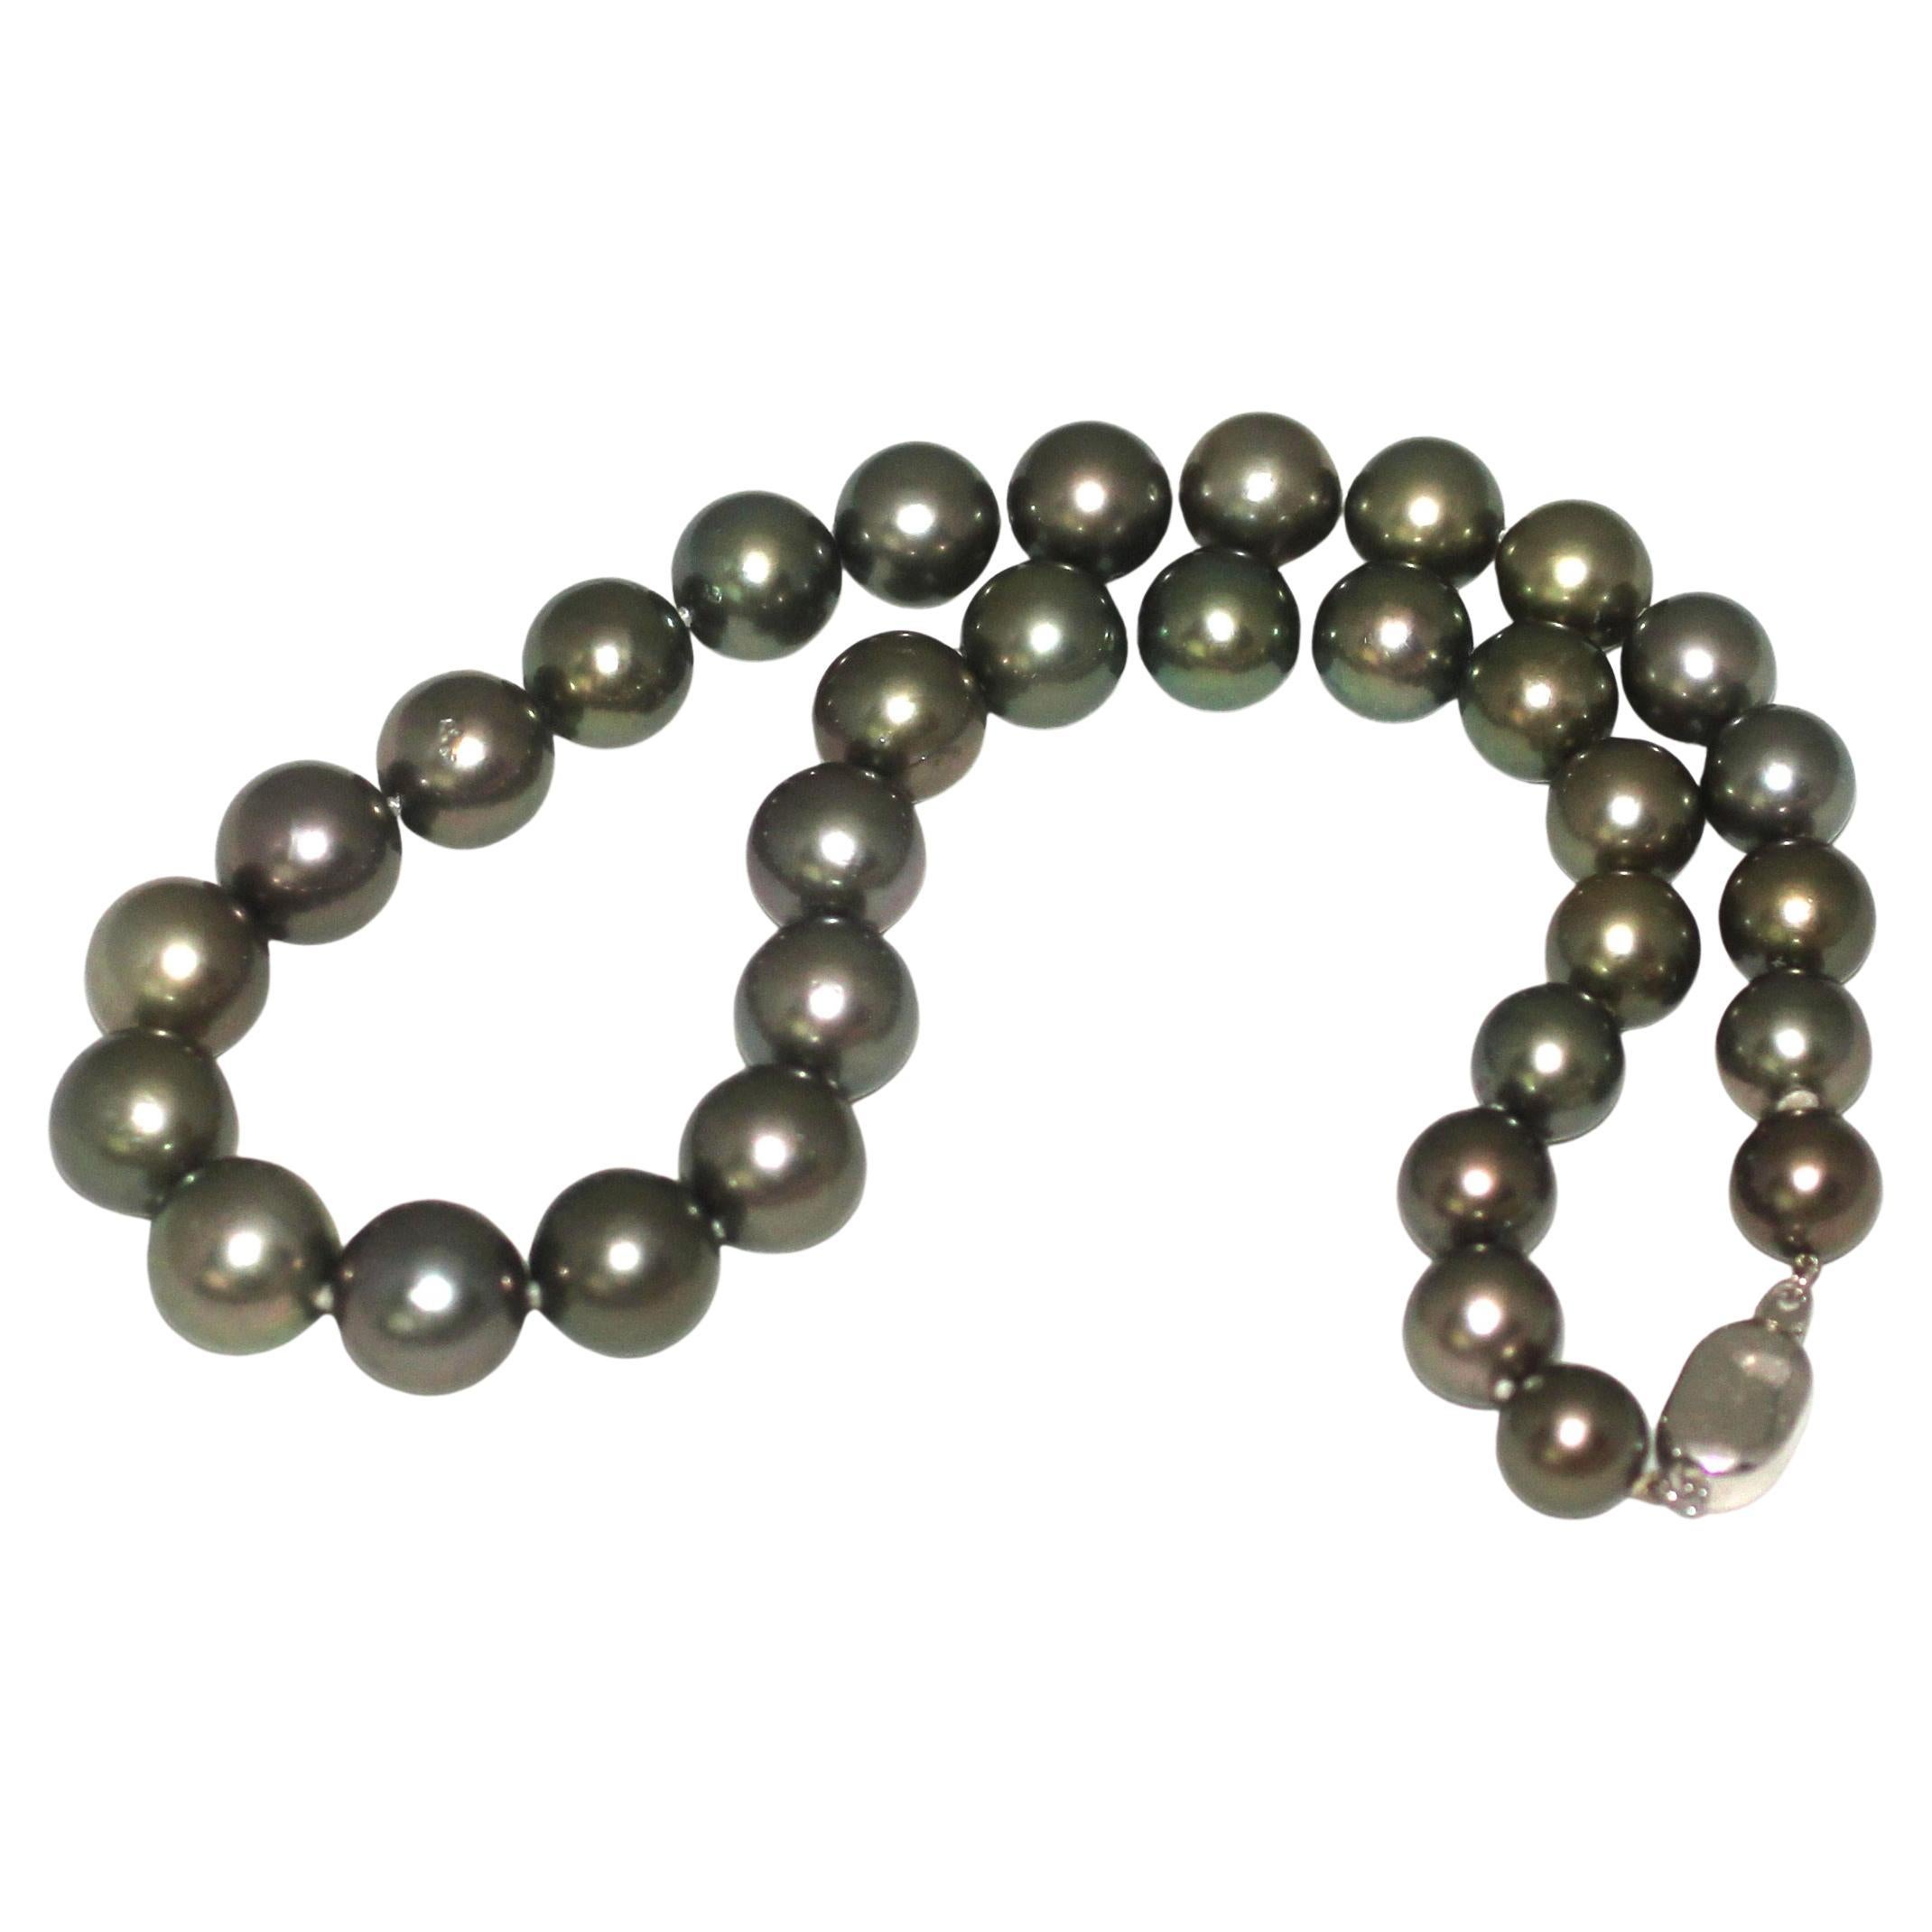 Bead Hakimoto 13x10 mm Tahitian South Sea Pearl Necklace 18K White Gold Clasp